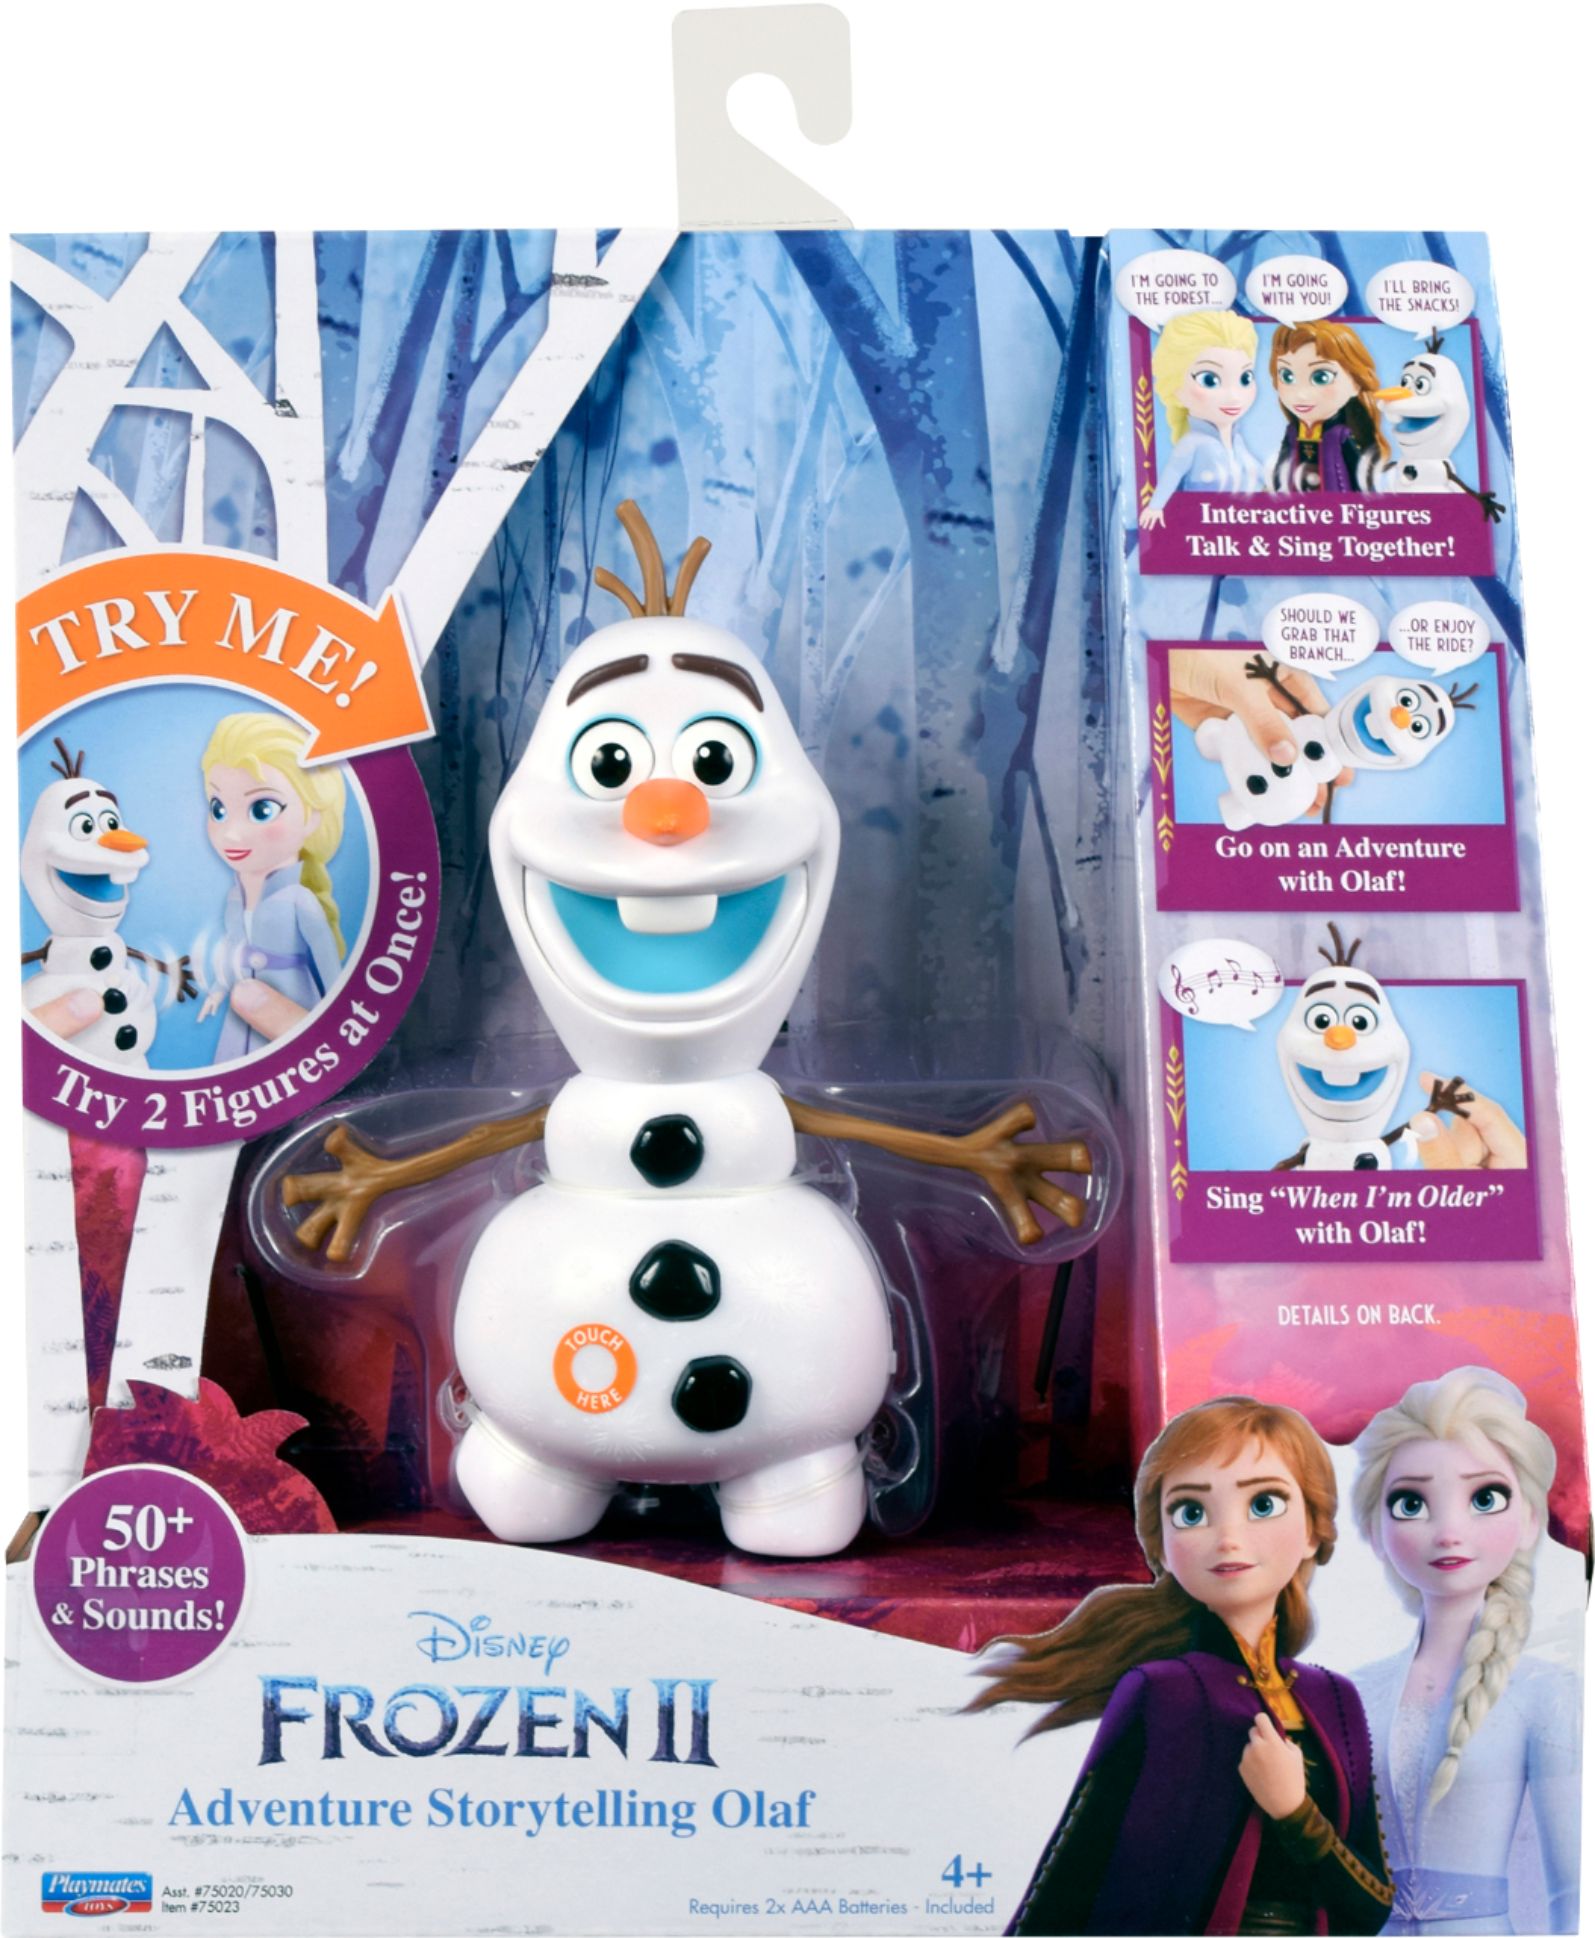 Disney Frozen II Adventure Storytelling Anna w/ 50 Phrases and Sounds Brand New 